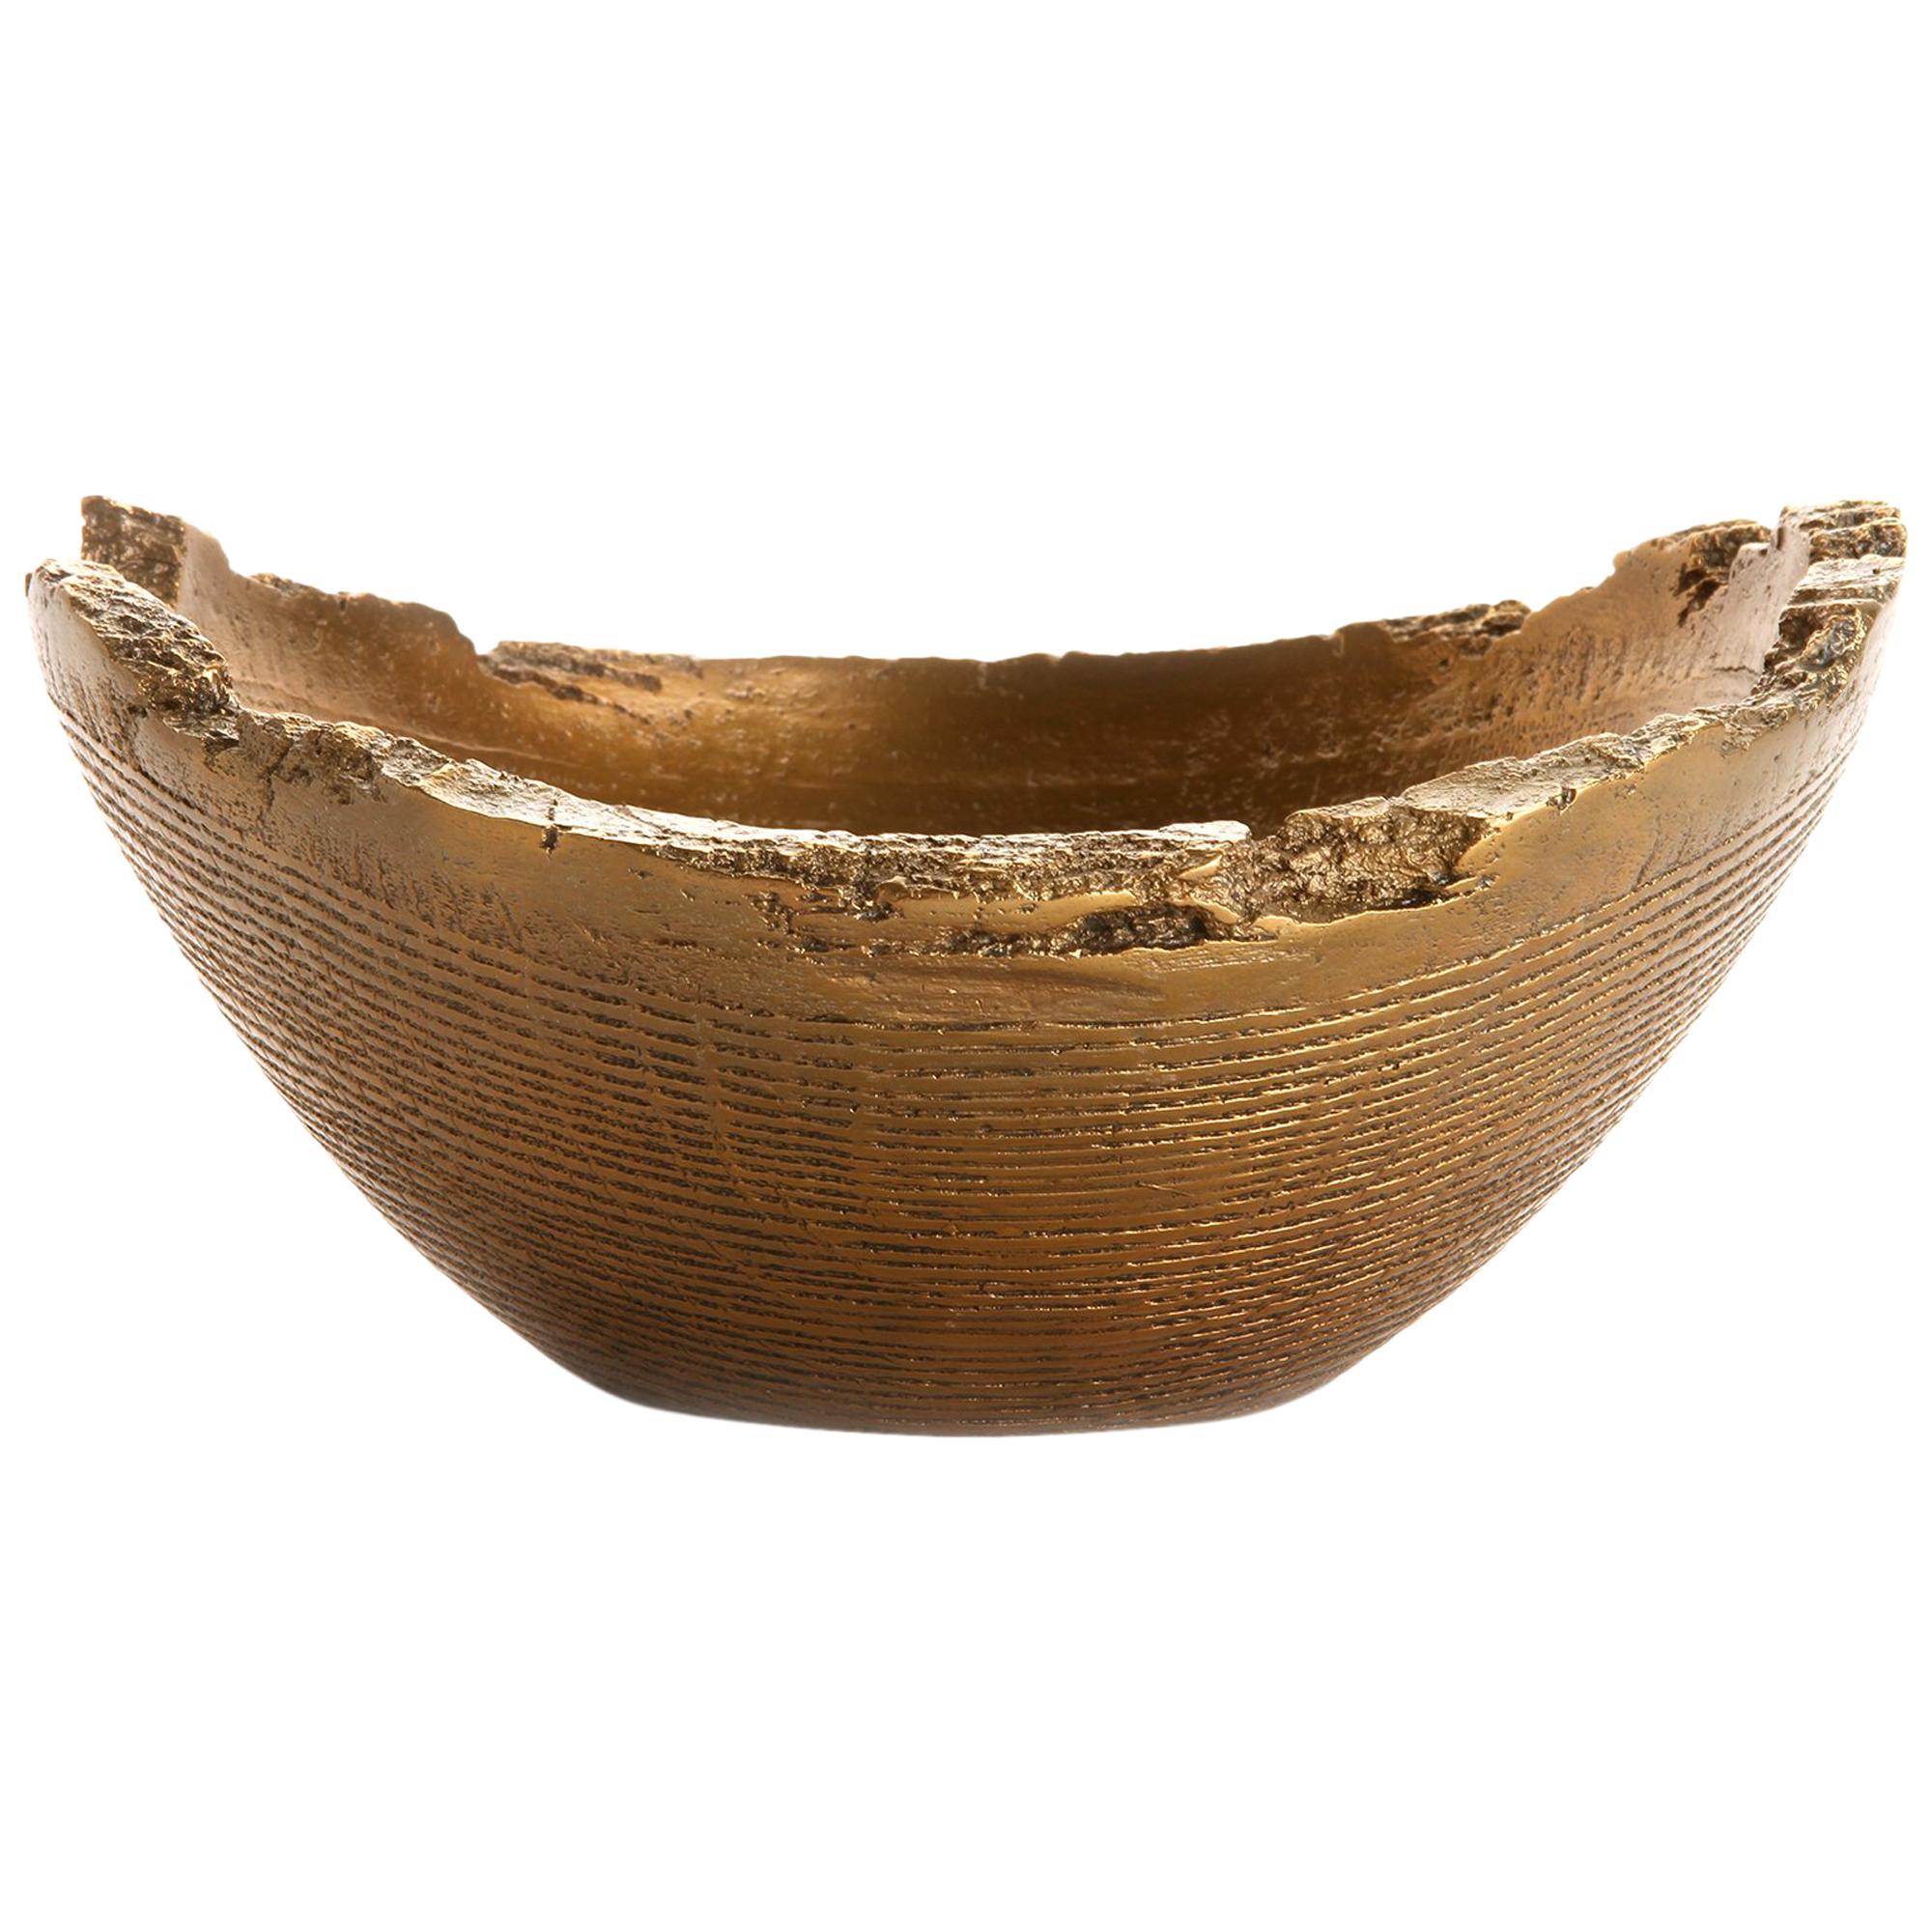 Solid Bronze "Juniper" Bowl or Vessel with Wood Texture in Gold Patina, in Stock For Sale